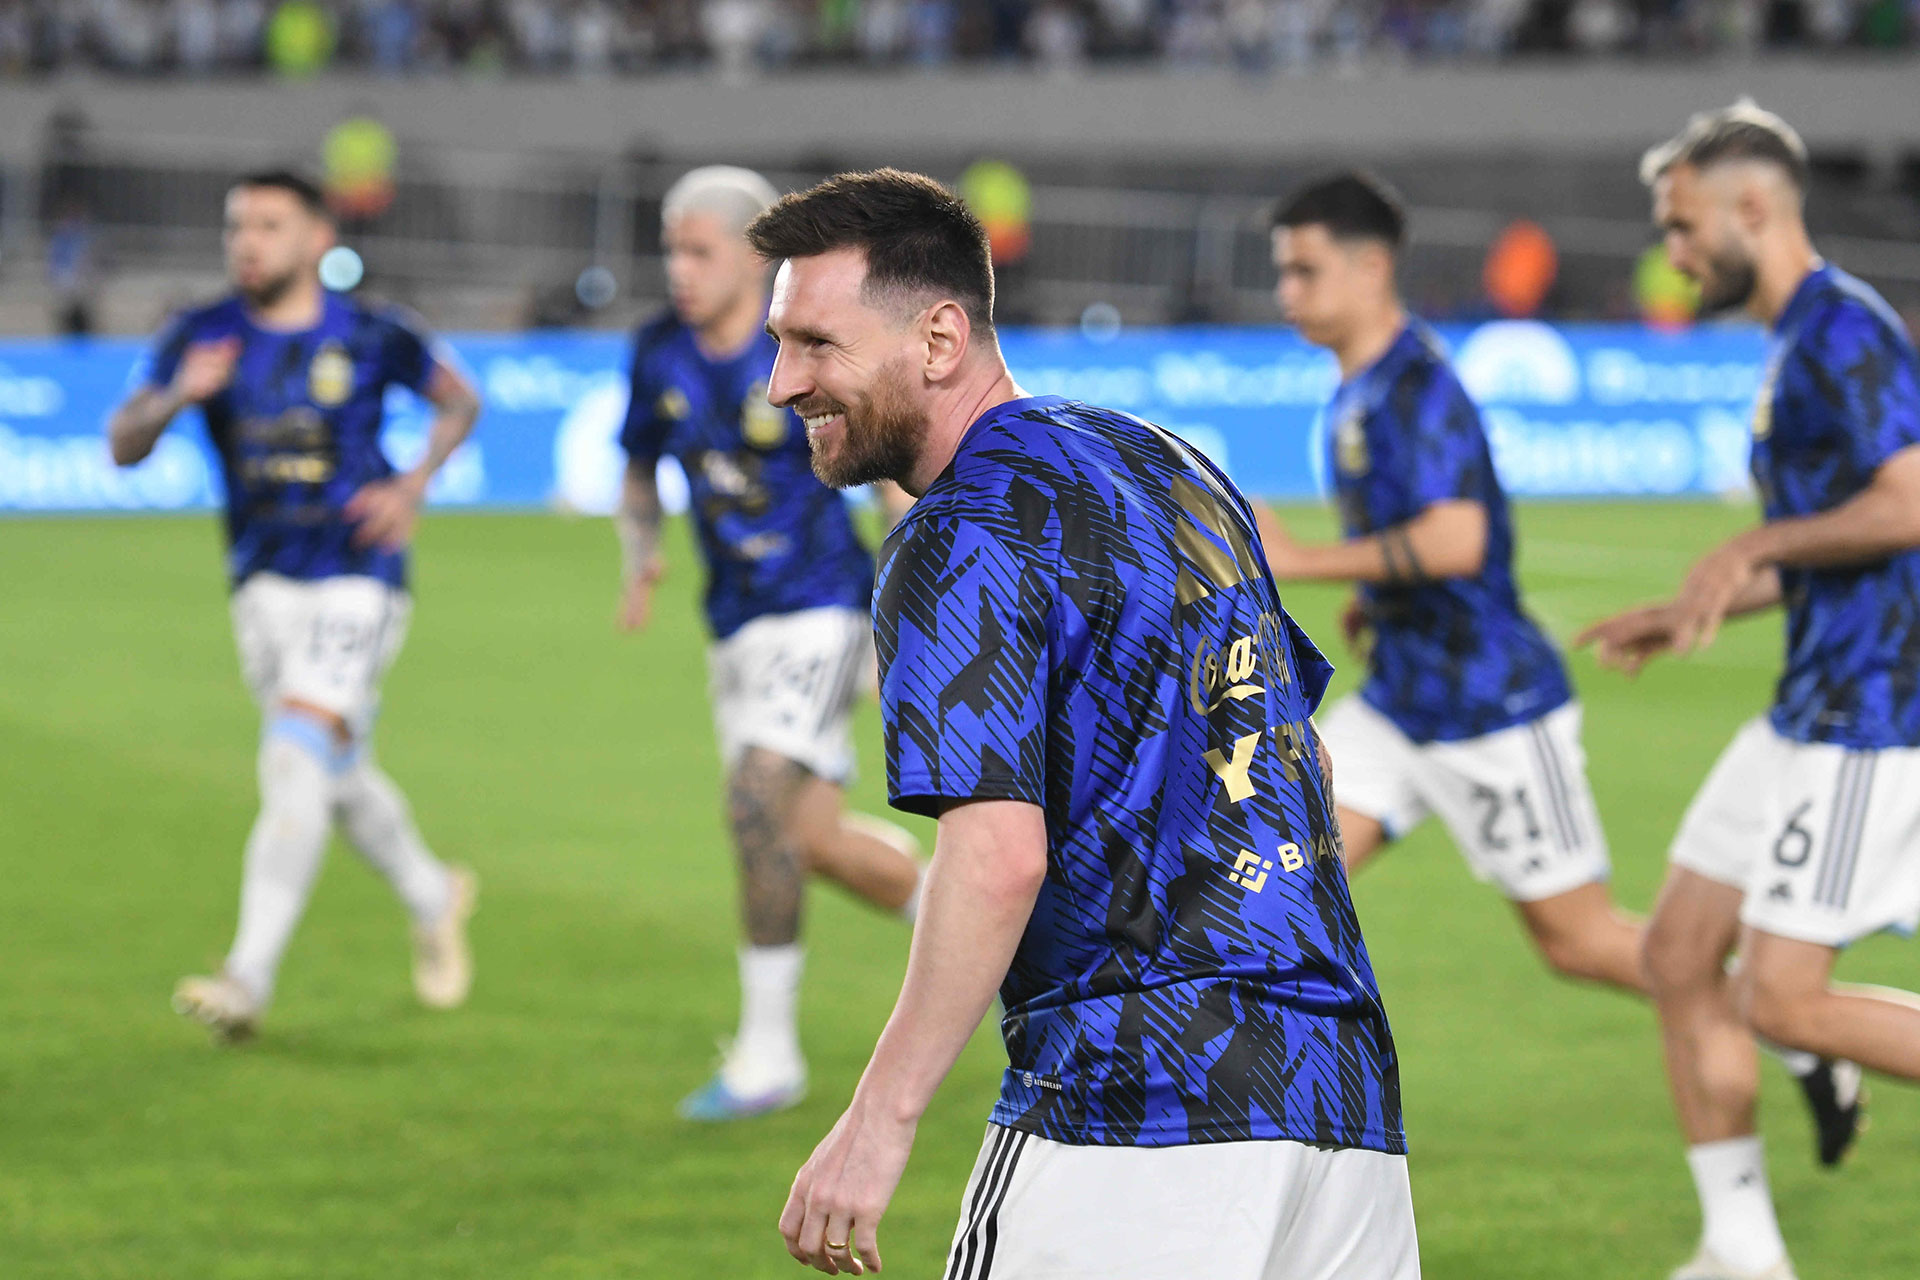 Leo Messi has fun and smiles with his teammates before the game 